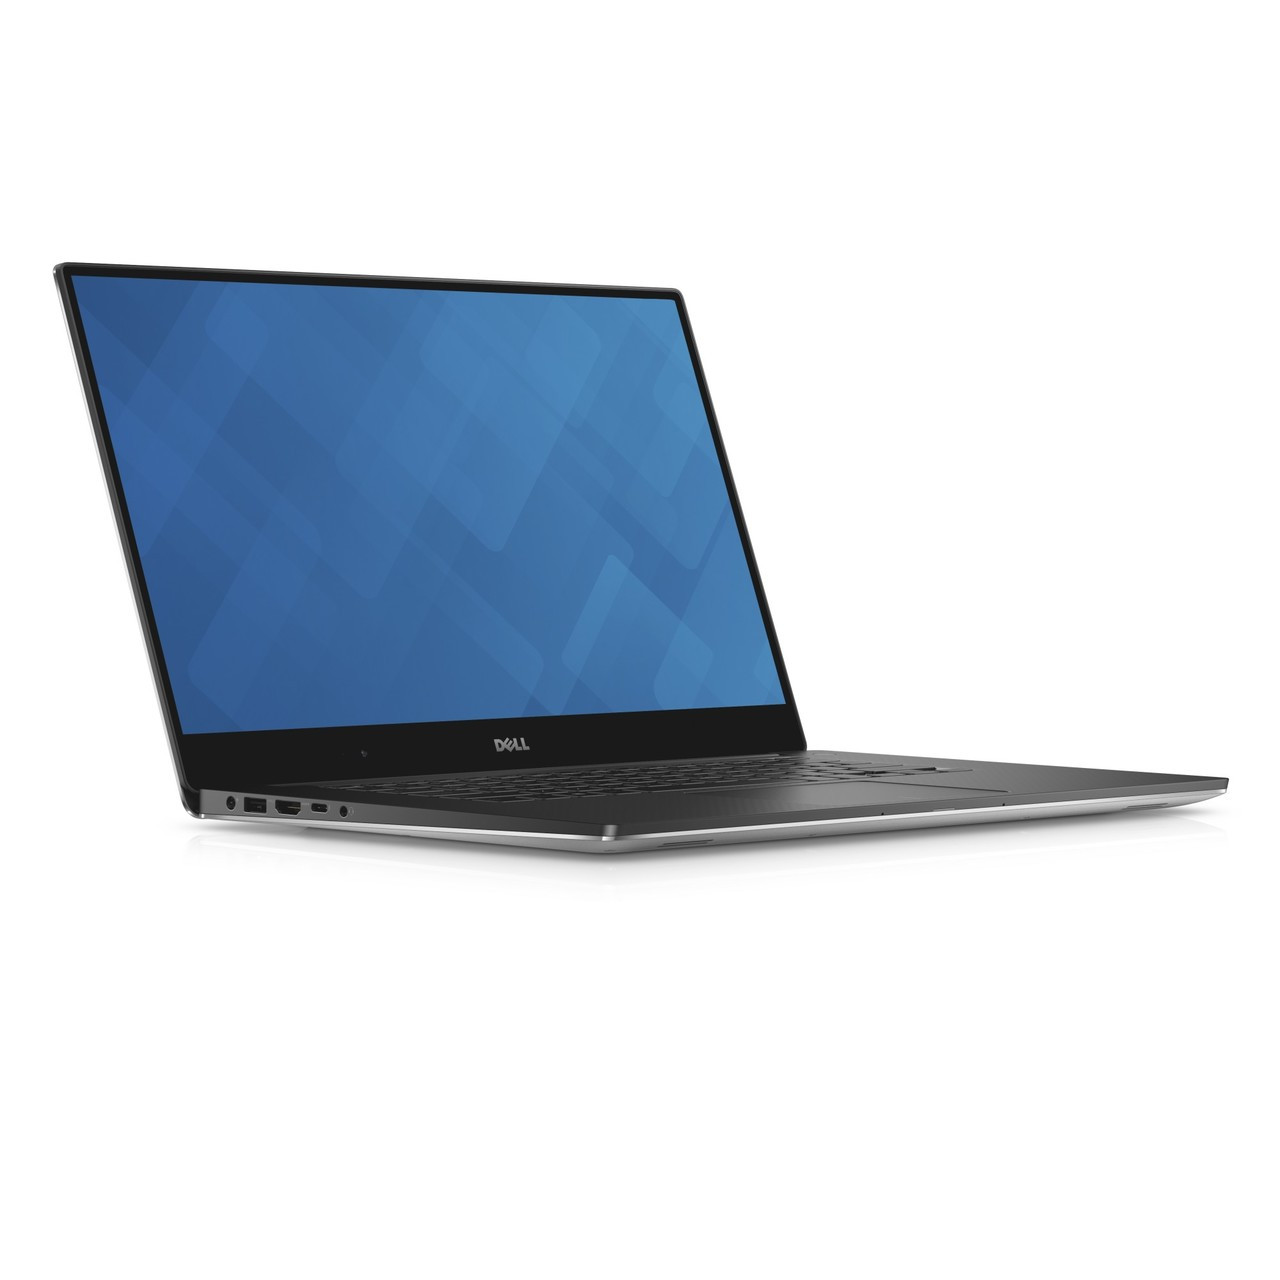 DELL XPS 9560 2.8GHz i7-7700HQ 15.6" 3840 x 2160pixels Touchscreen Black,Silver Notebook